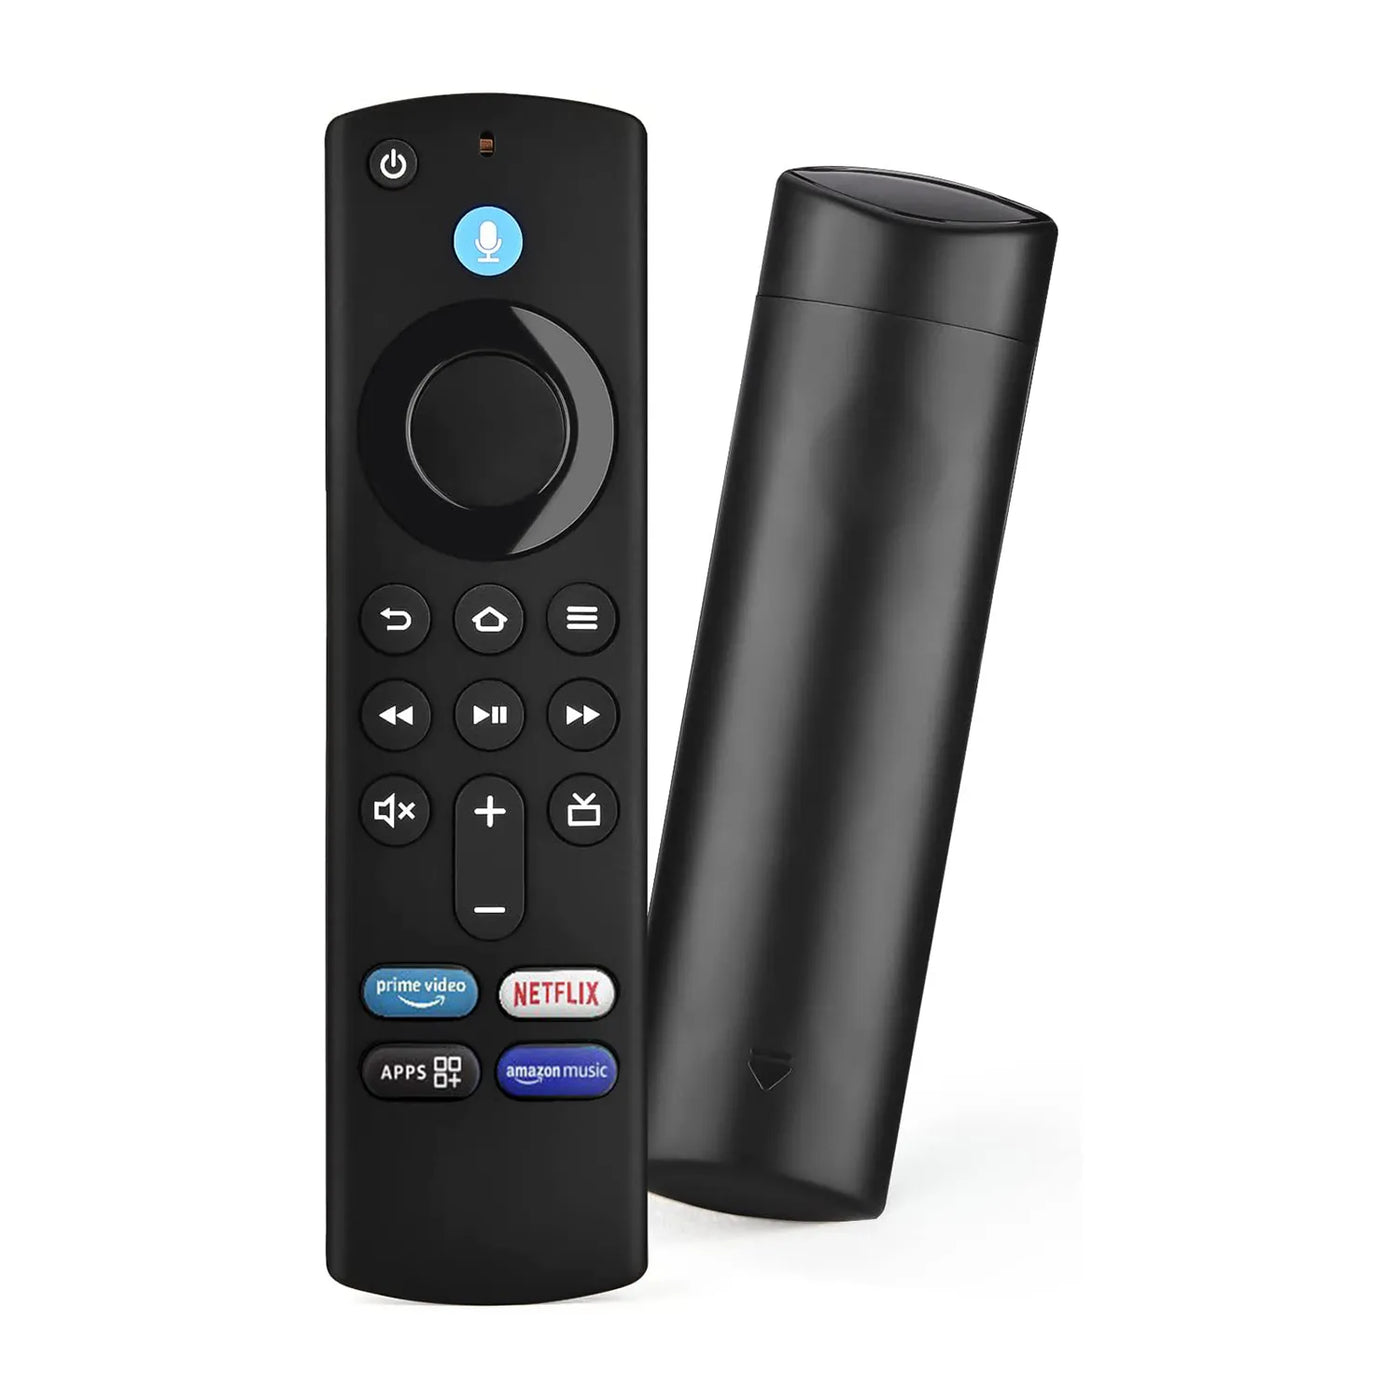 Muvit Fire Tv Stick Remote with Alexa Voice Control (3rd Generation)